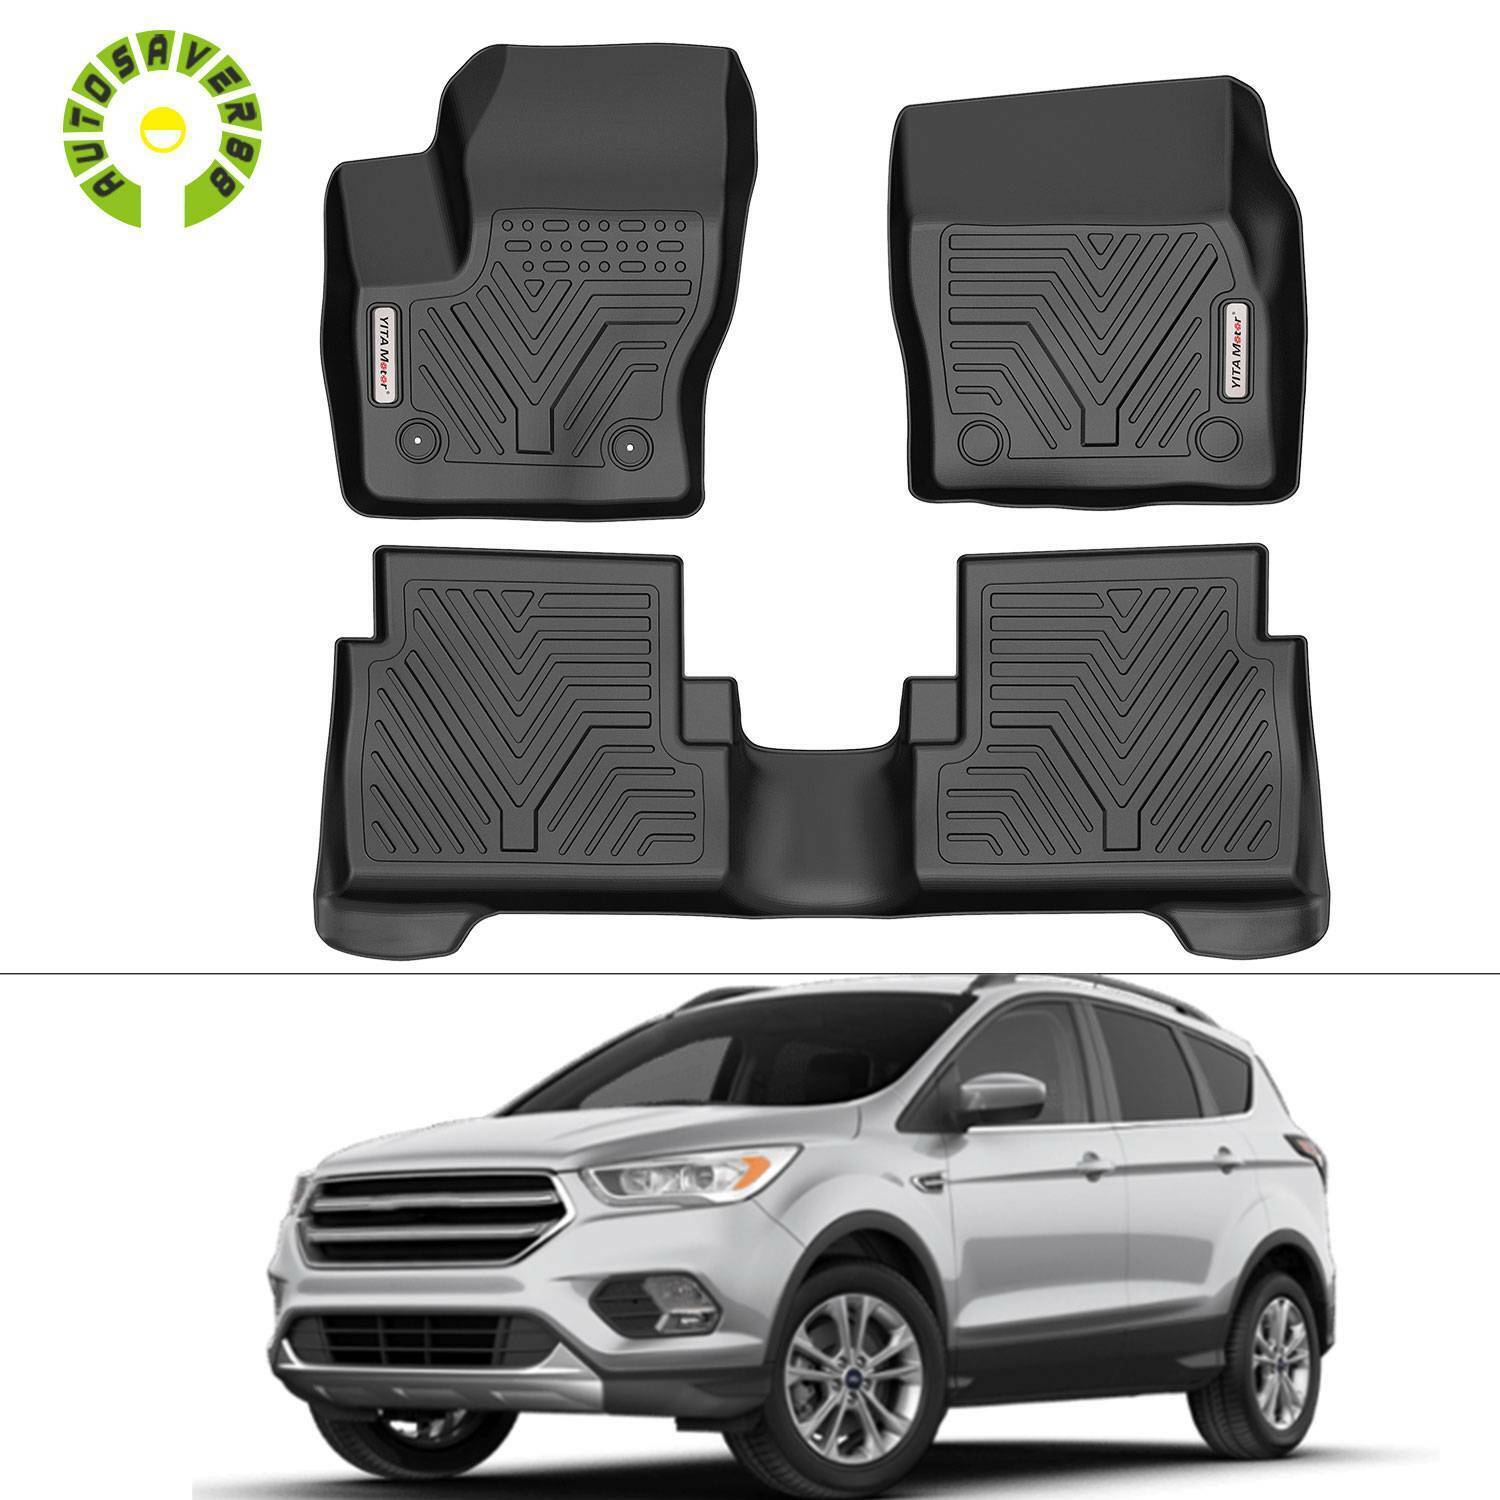 1st & 2nd Row Floor Mats for 2013-2019 Ford Escape All Season Anti-Slip Liners